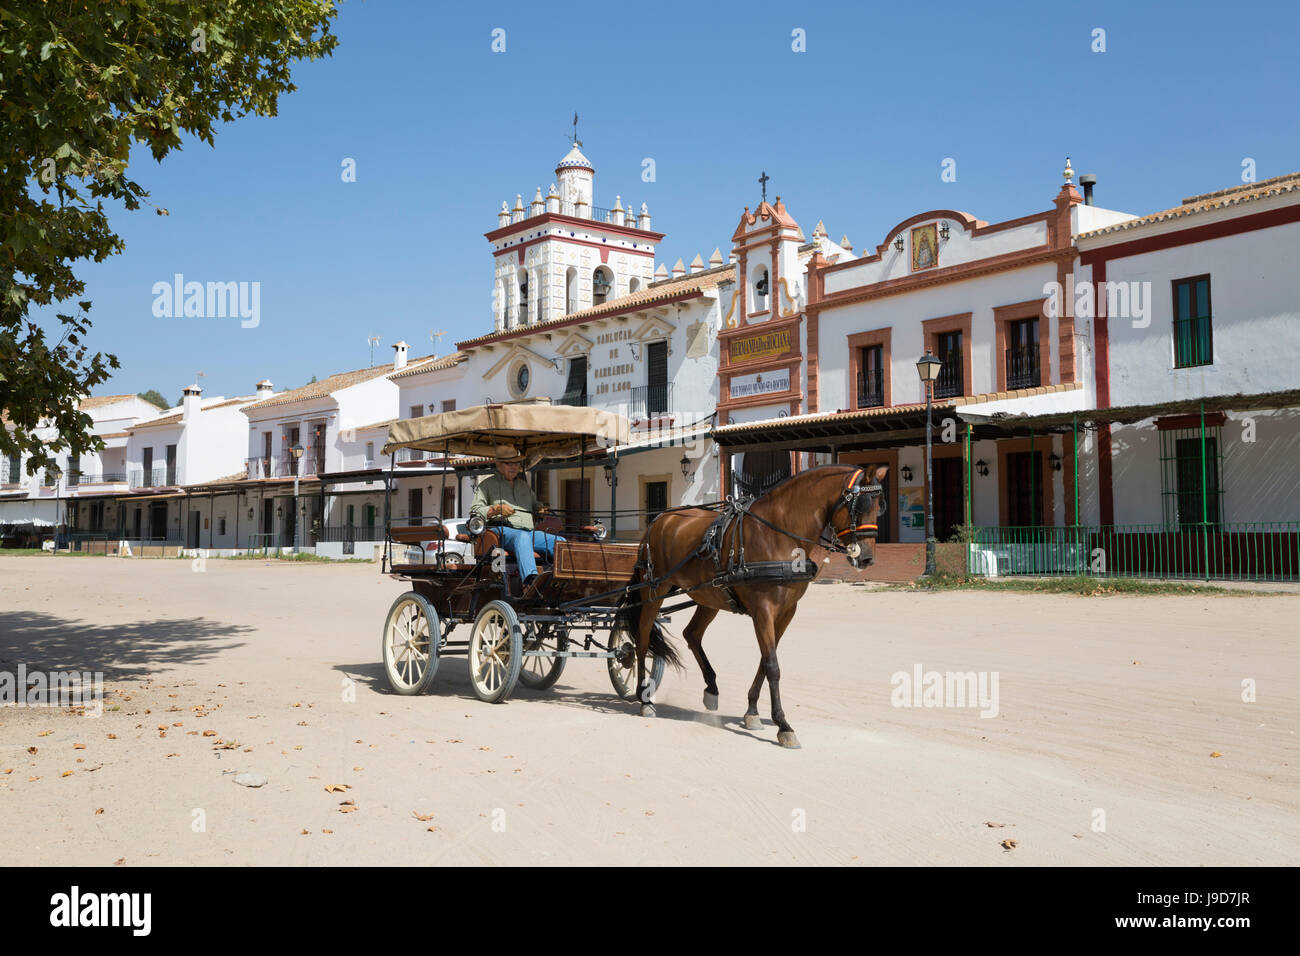 Horse and carriage riding along sand streets with brotherhood houses behind, El Rocio, Huelva Province, Andalucia, Spain, Europe Stock Photo